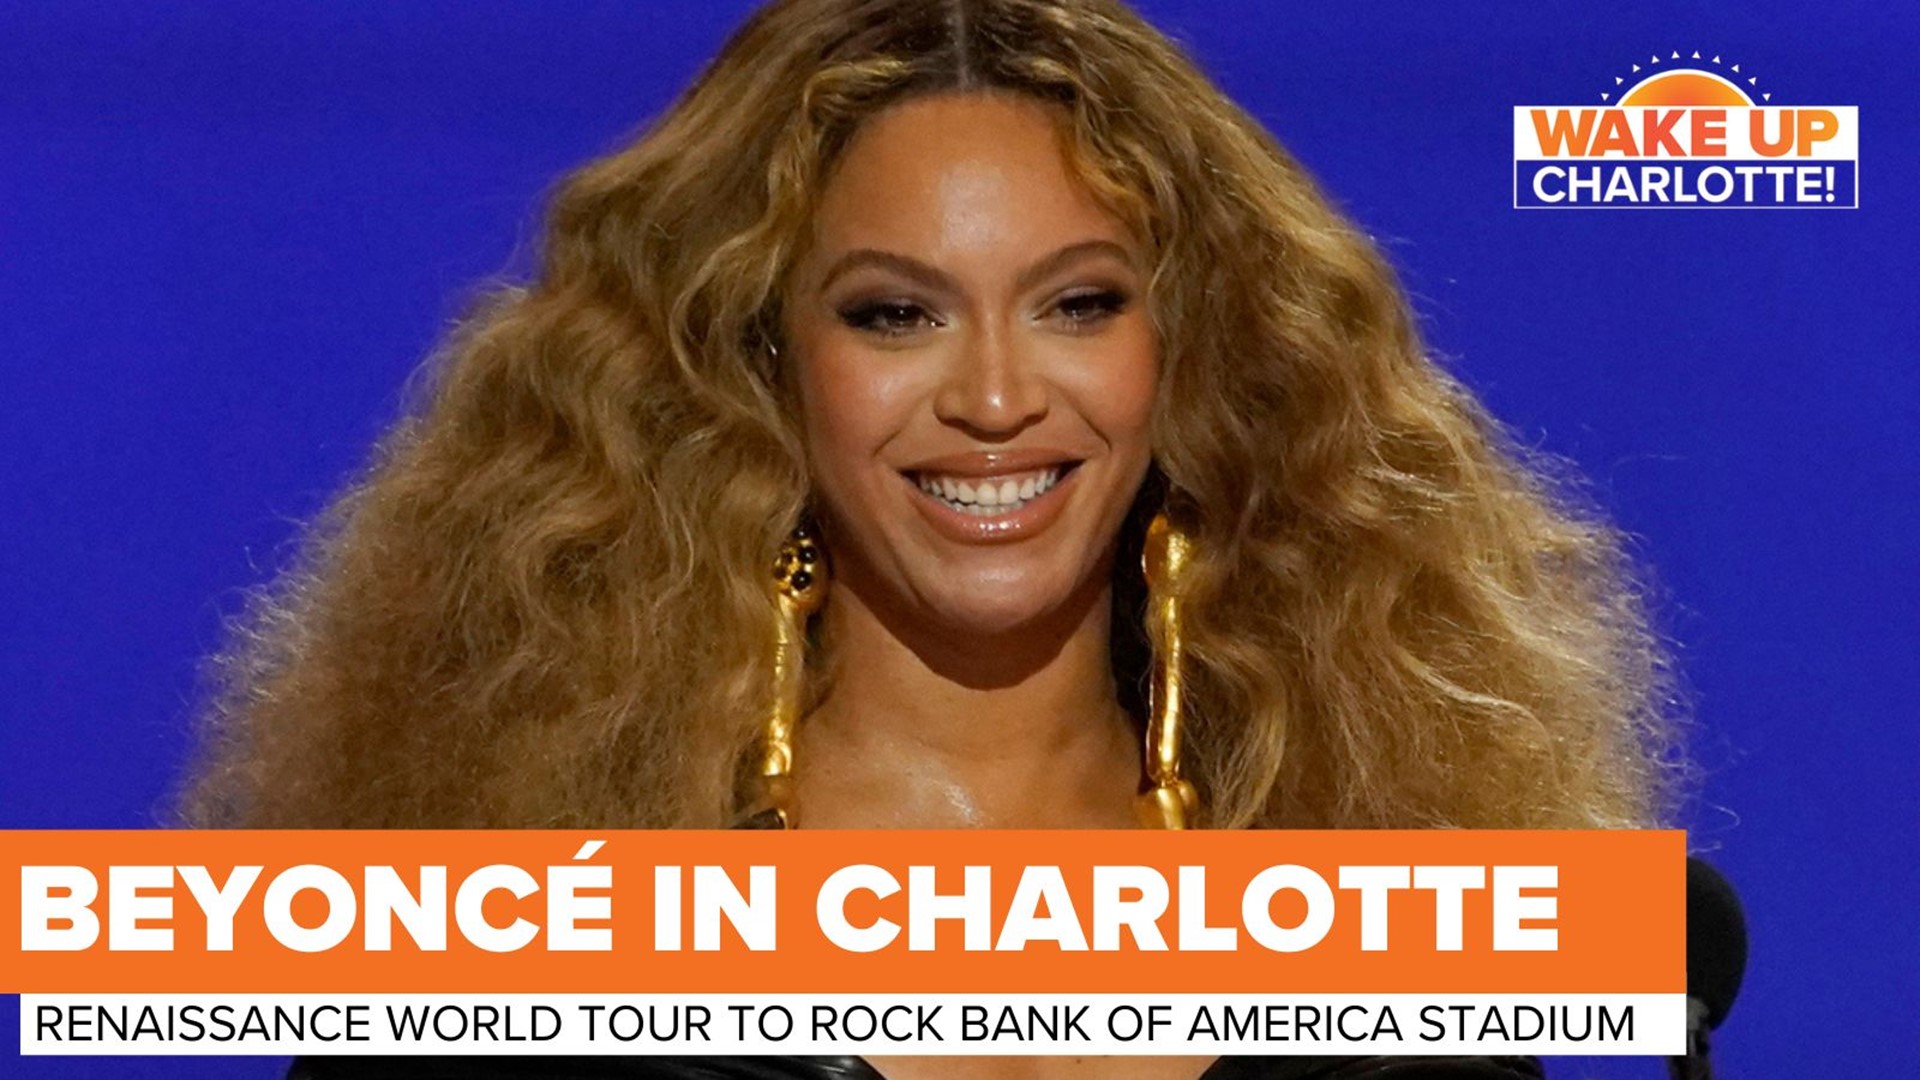 The Renaissance World Tour is rolling into Charlotte Wednesday. Here's what you can expect at the highly anticipated concert.